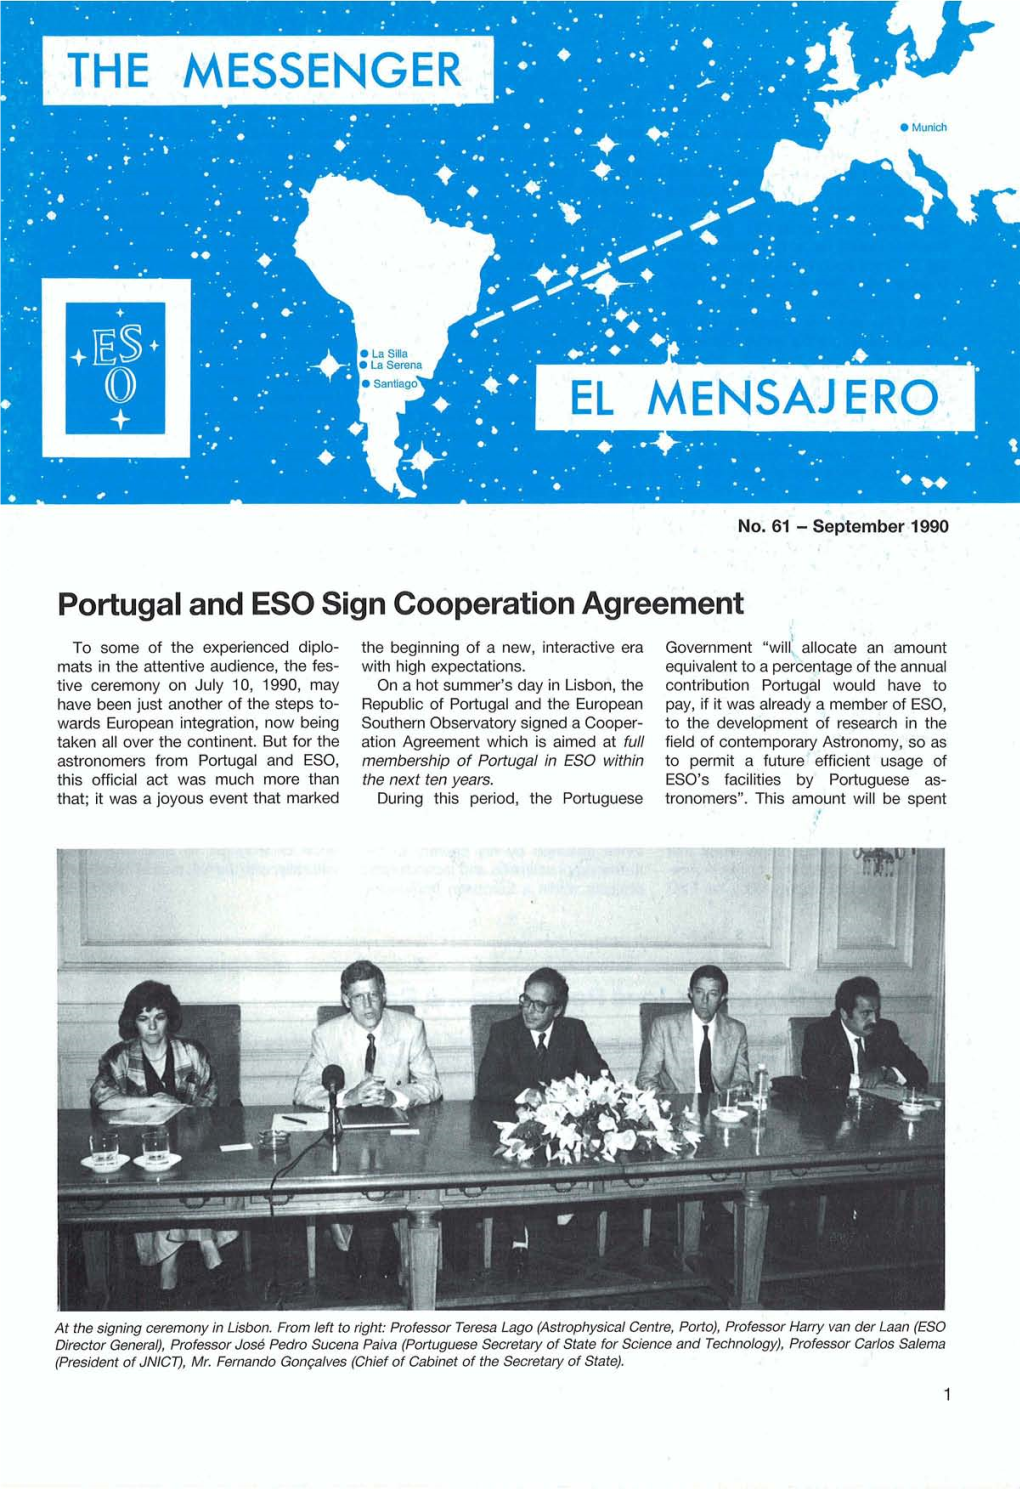 Portugal and ESO Sign Cooperation Agreement